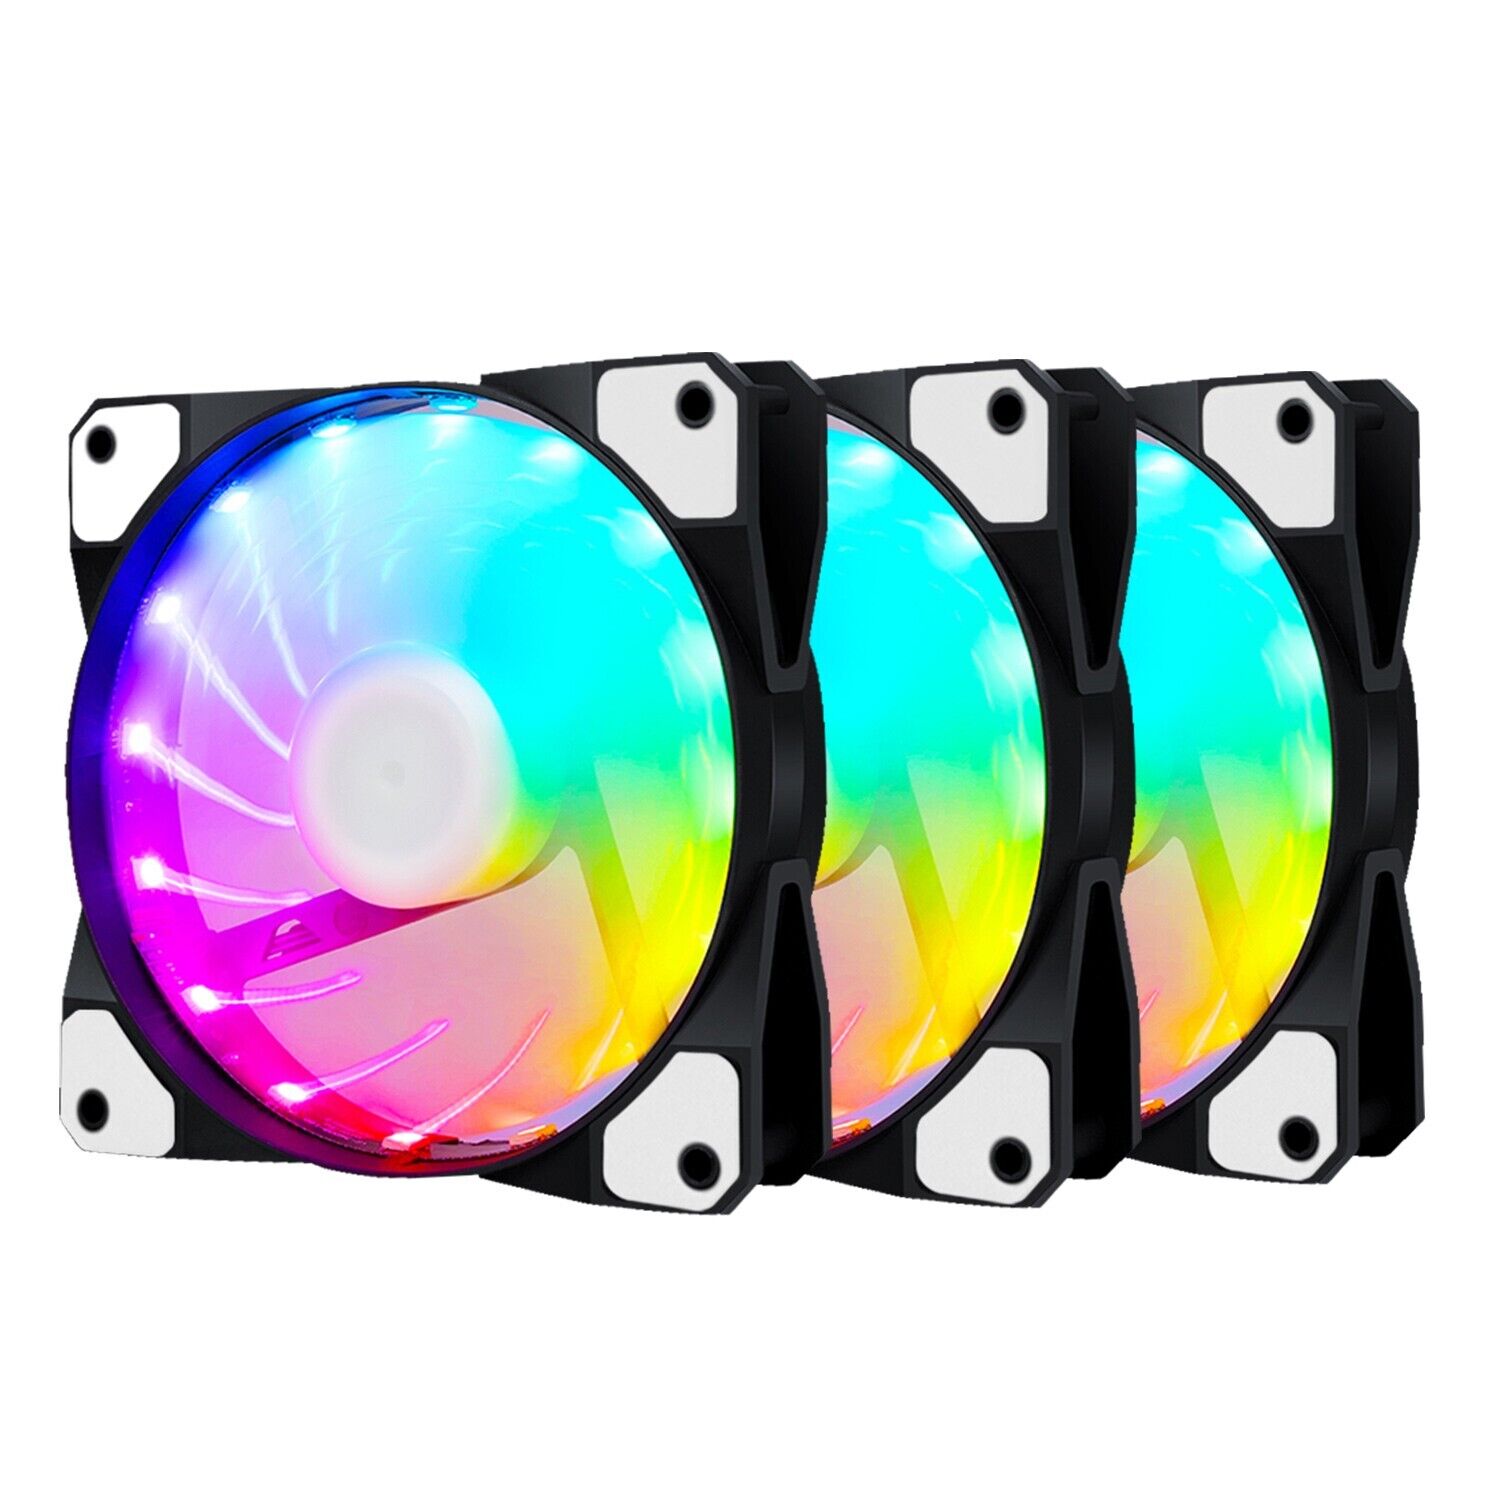 3-Pack 120mm RGB Quiet Computer Case PC Cooling Fan RGB LED